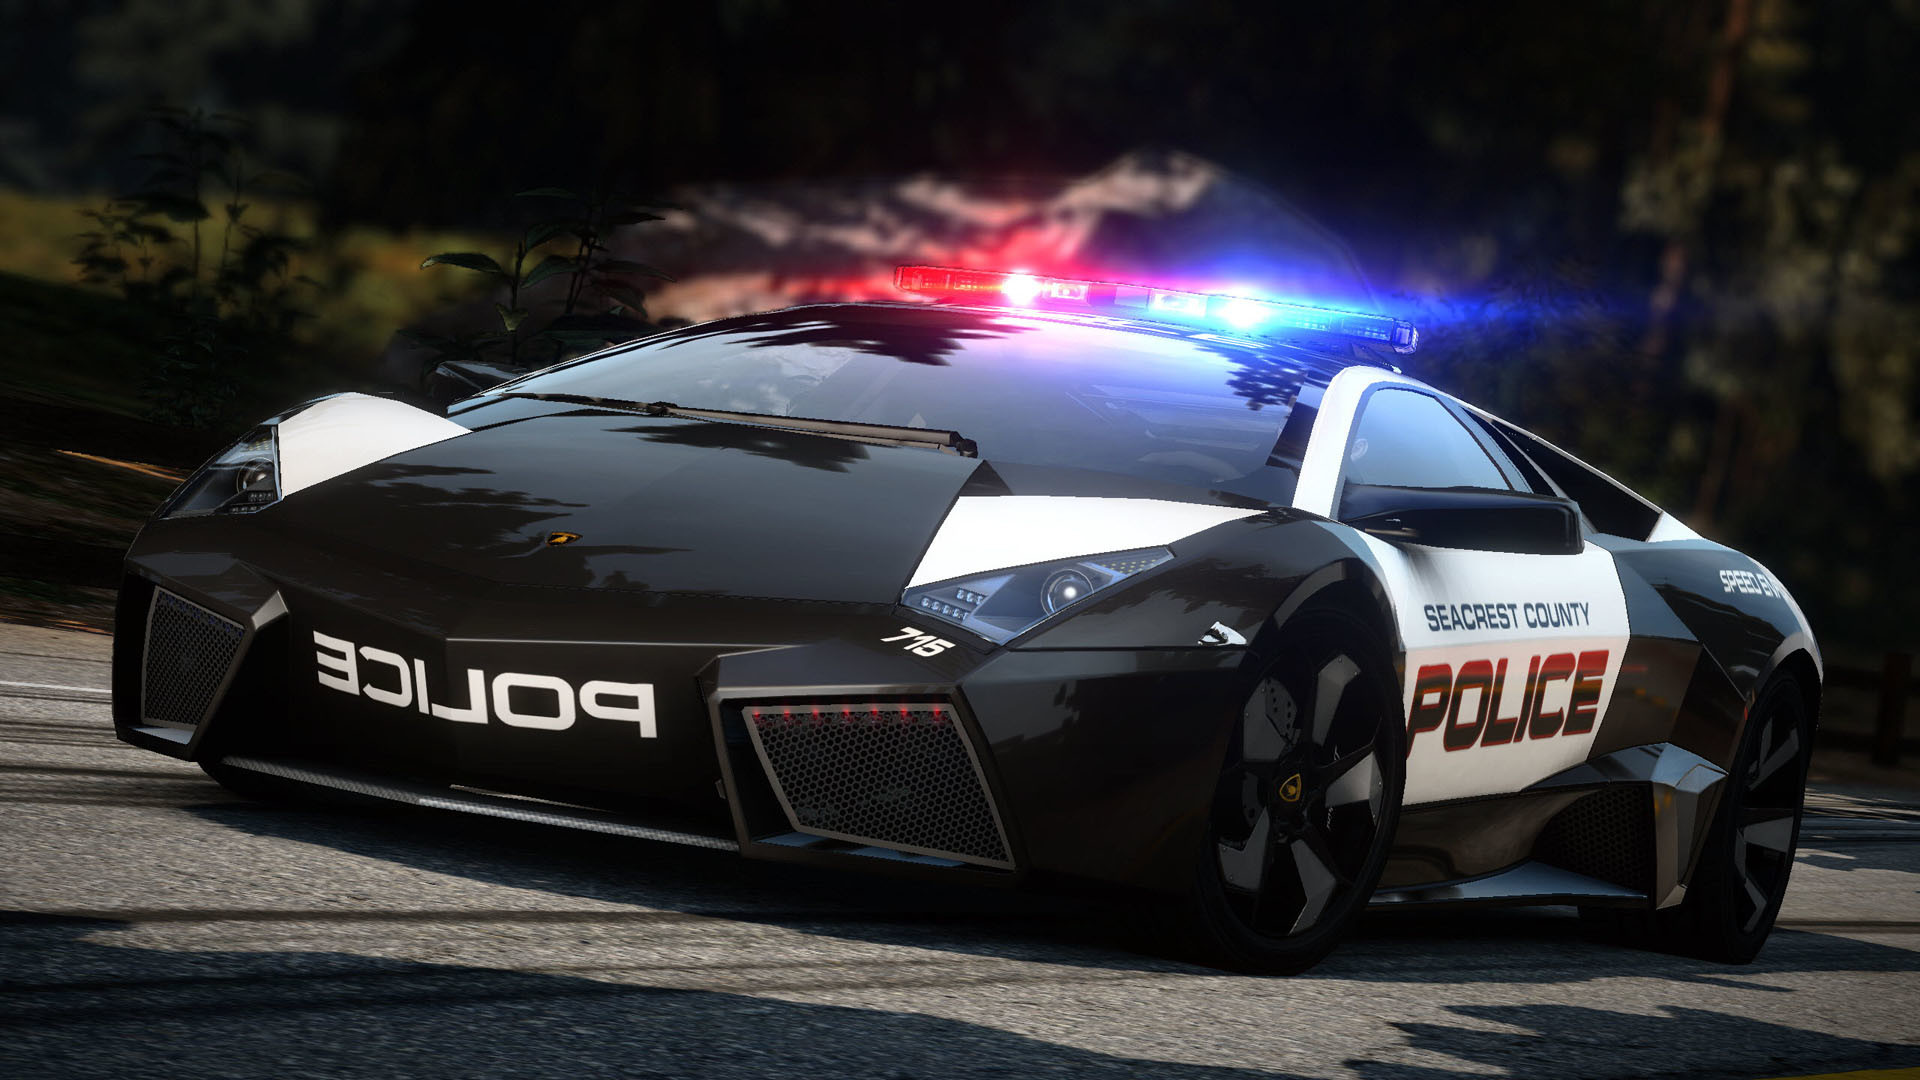 Very Nice Cars Wallpaper 90 With Very Nice Cars Wallpaper - Need For Speed Hot Pursuit Police Car - HD Wallpaper 